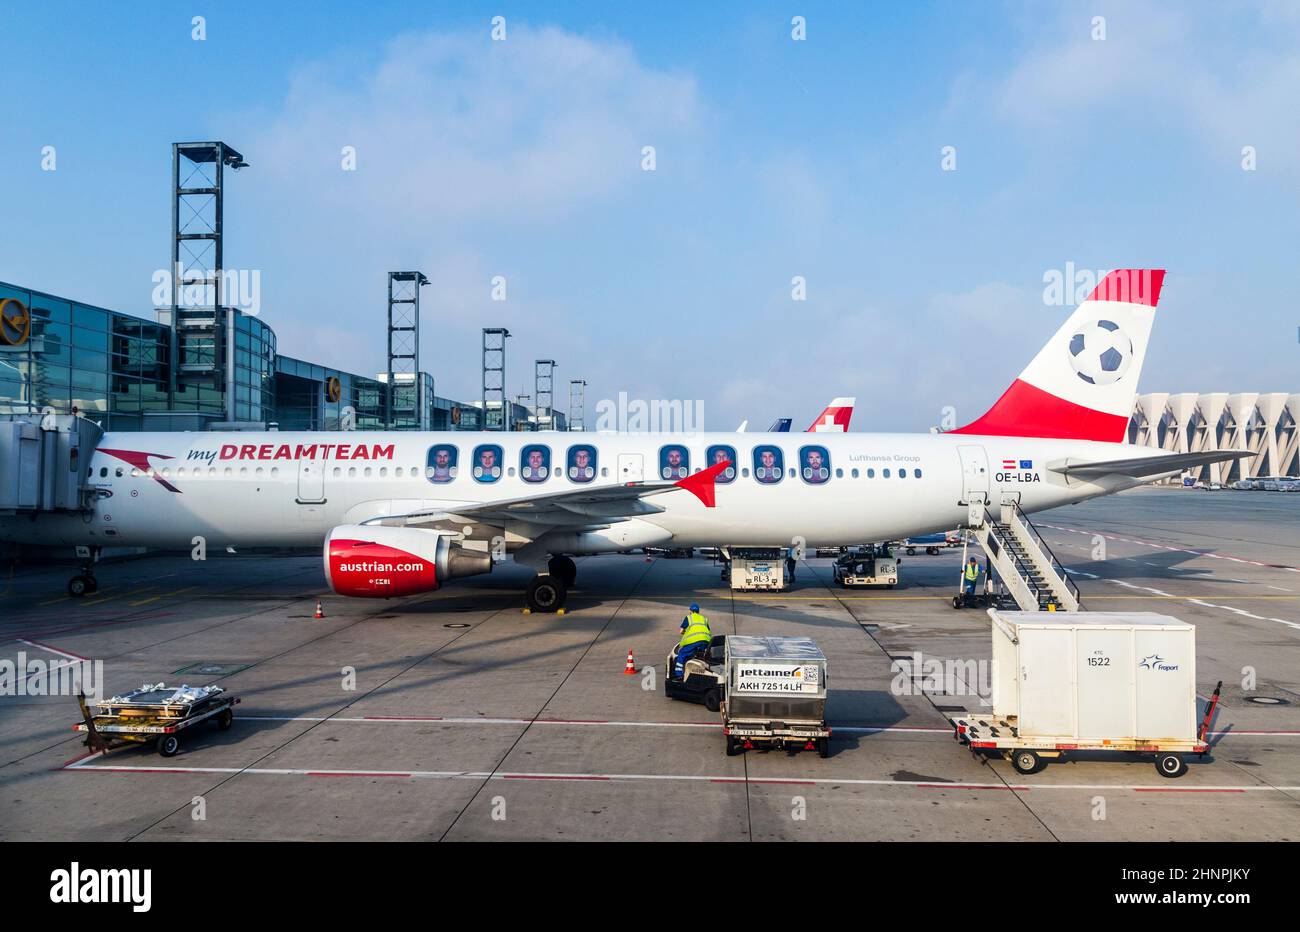 my DREAMTEAM AIRCRAFT shows the soccer player of austrian national team. Stock Photo